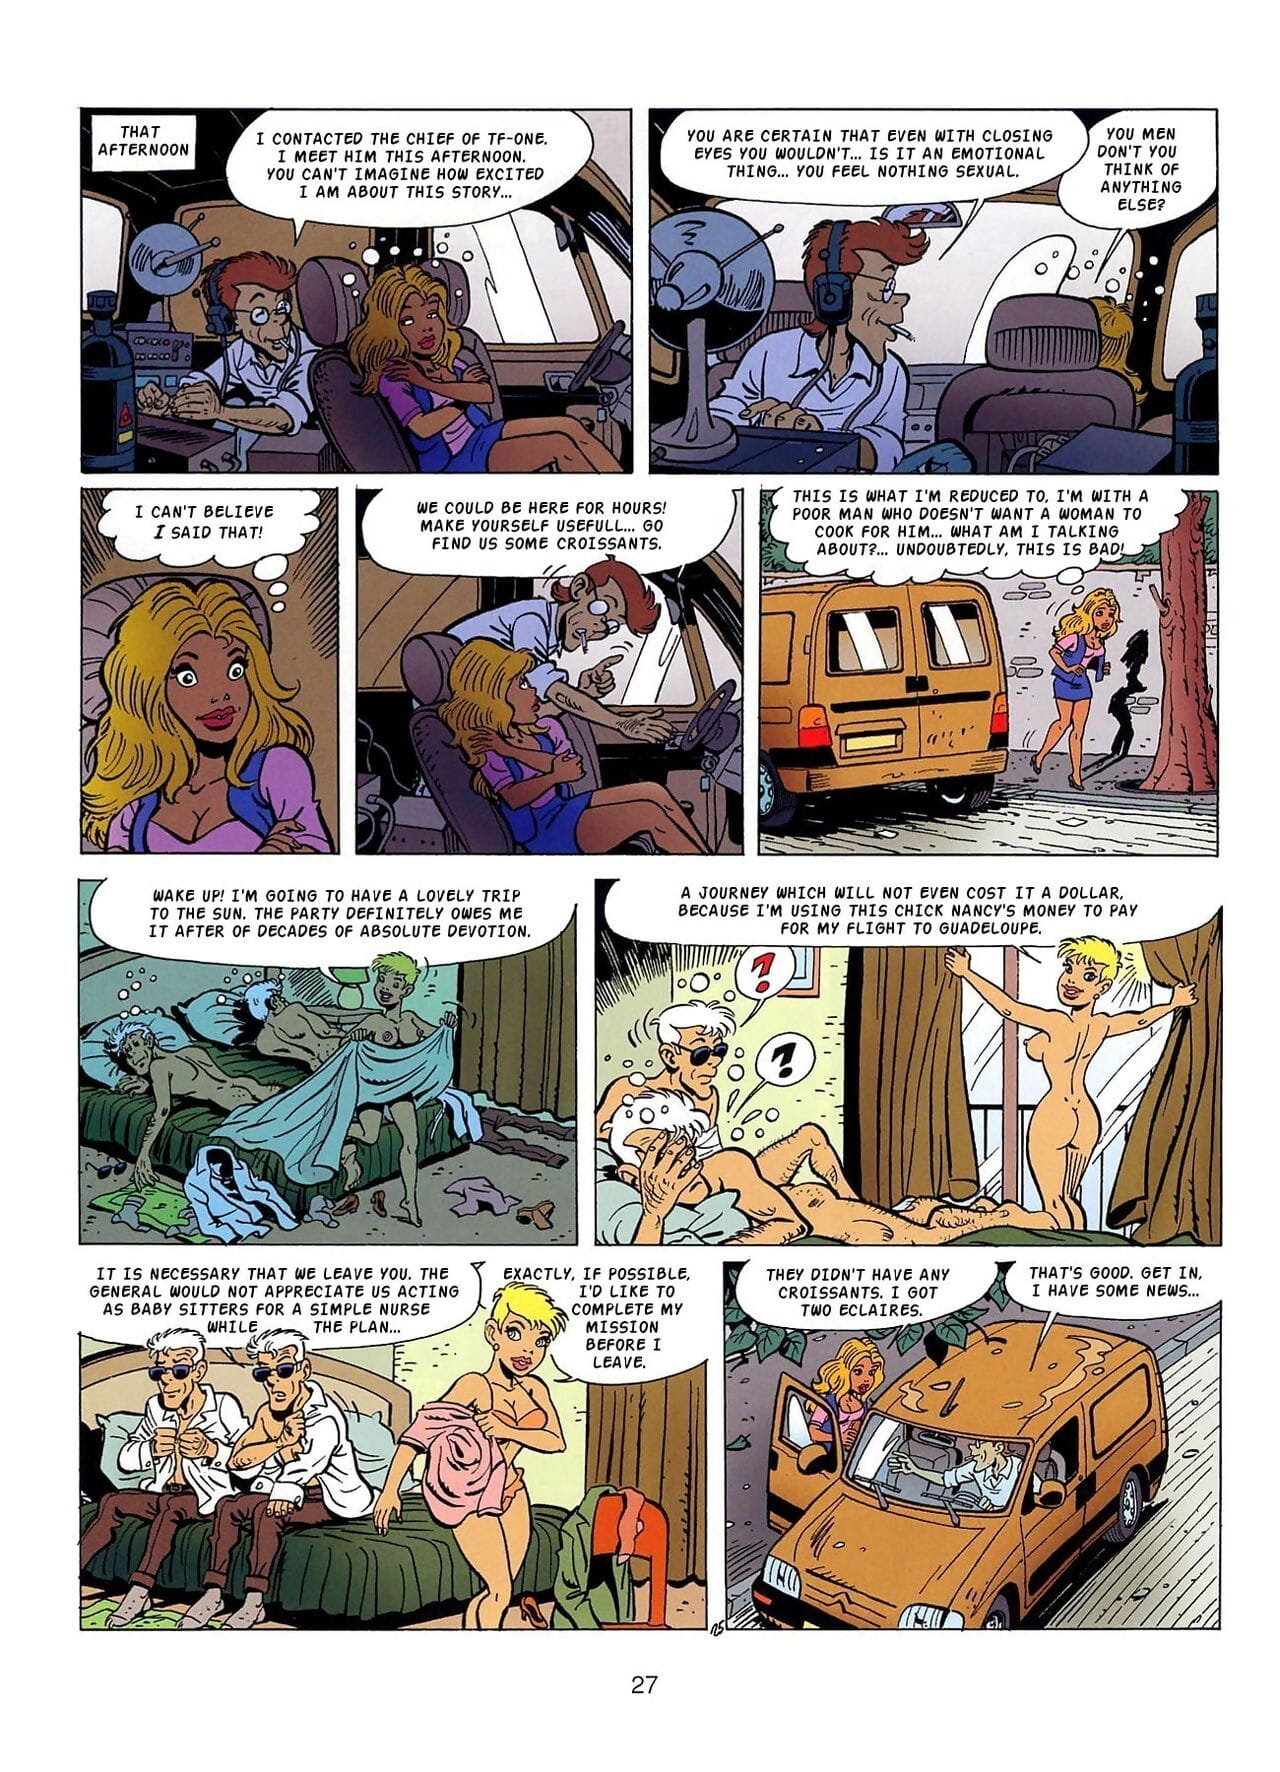 A Real Woman #3 page 1